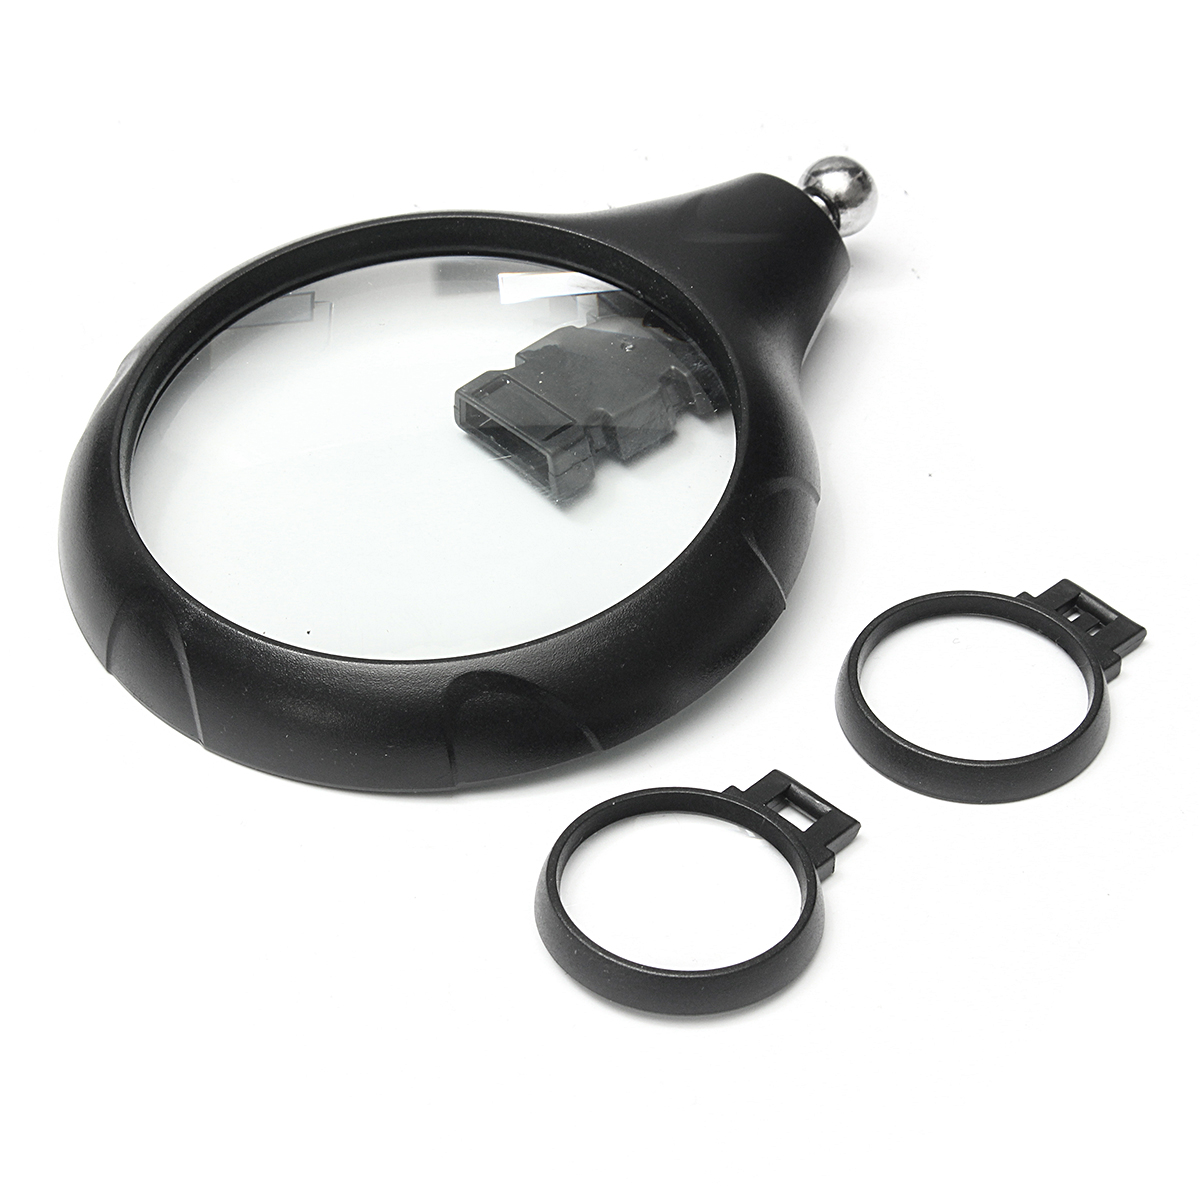 5-LED-Light-Magnifier-Magnifying-Glass-Helping-Hand-Soldering-Stand-with-3-Lens-1121941-6